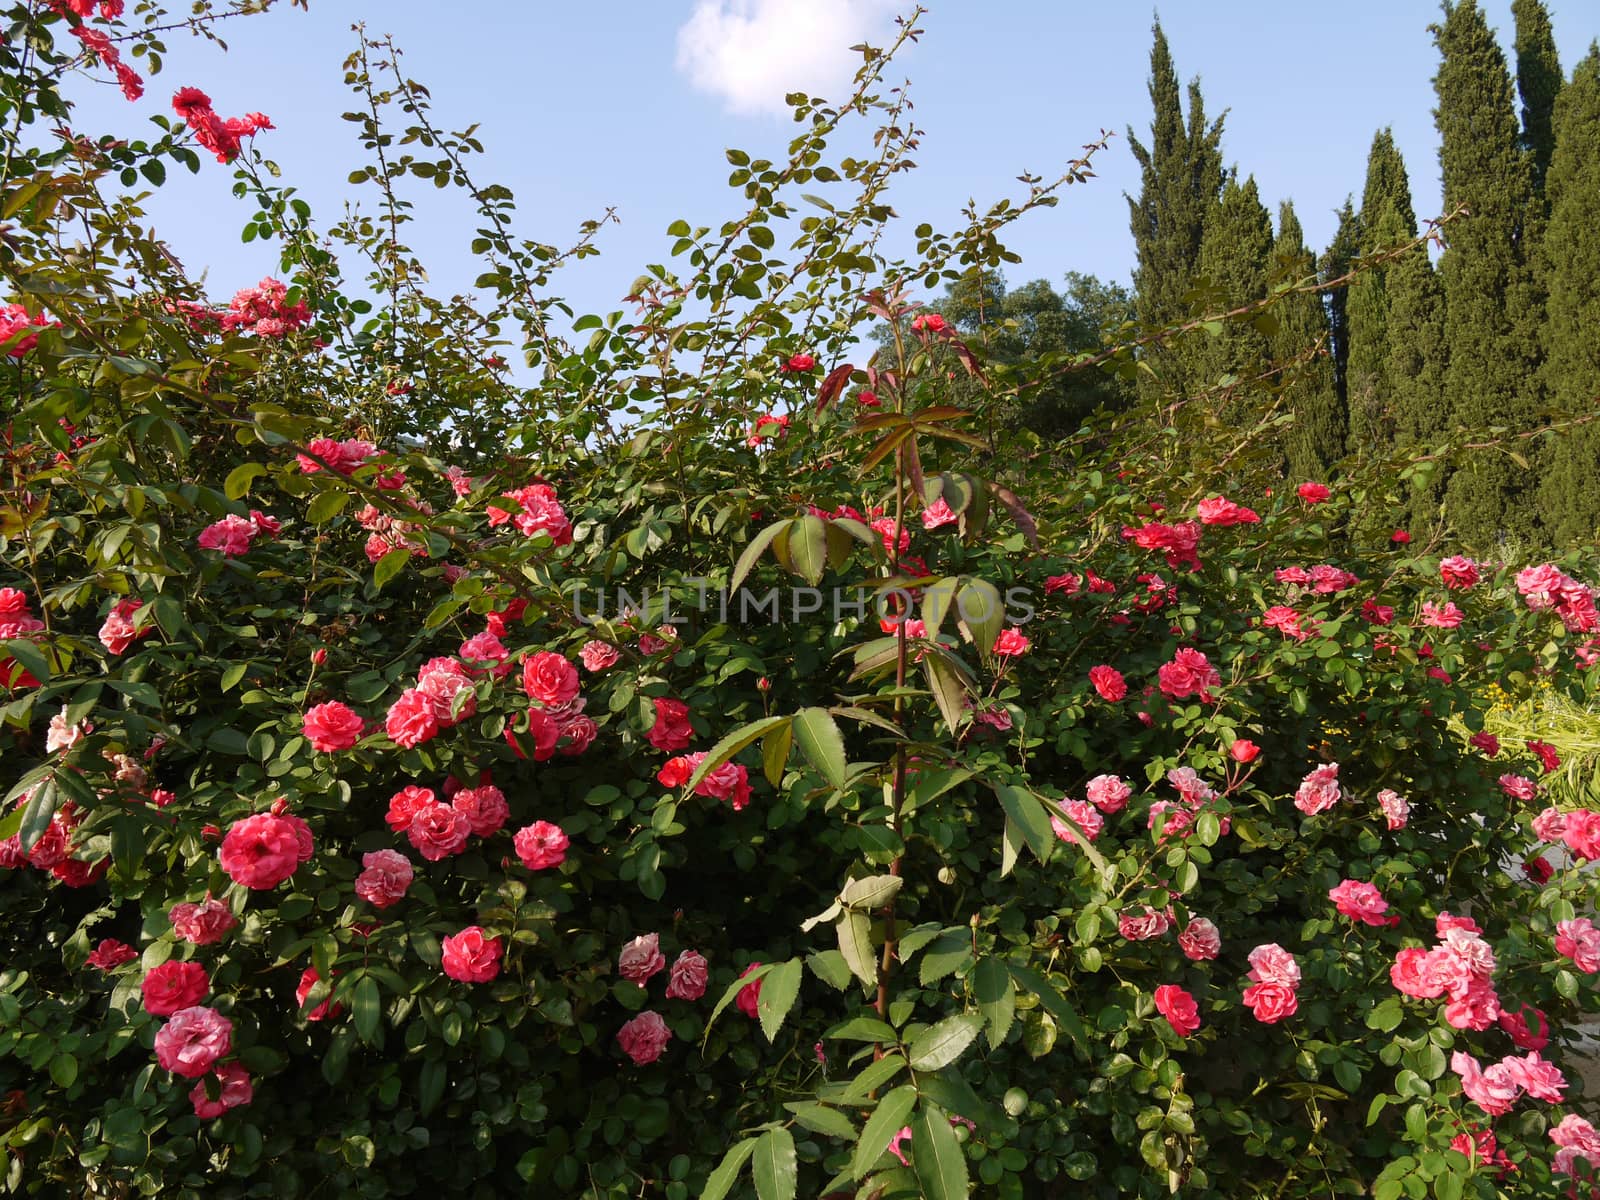 Thick, woven rose bushes with mane stalks and prickly needles